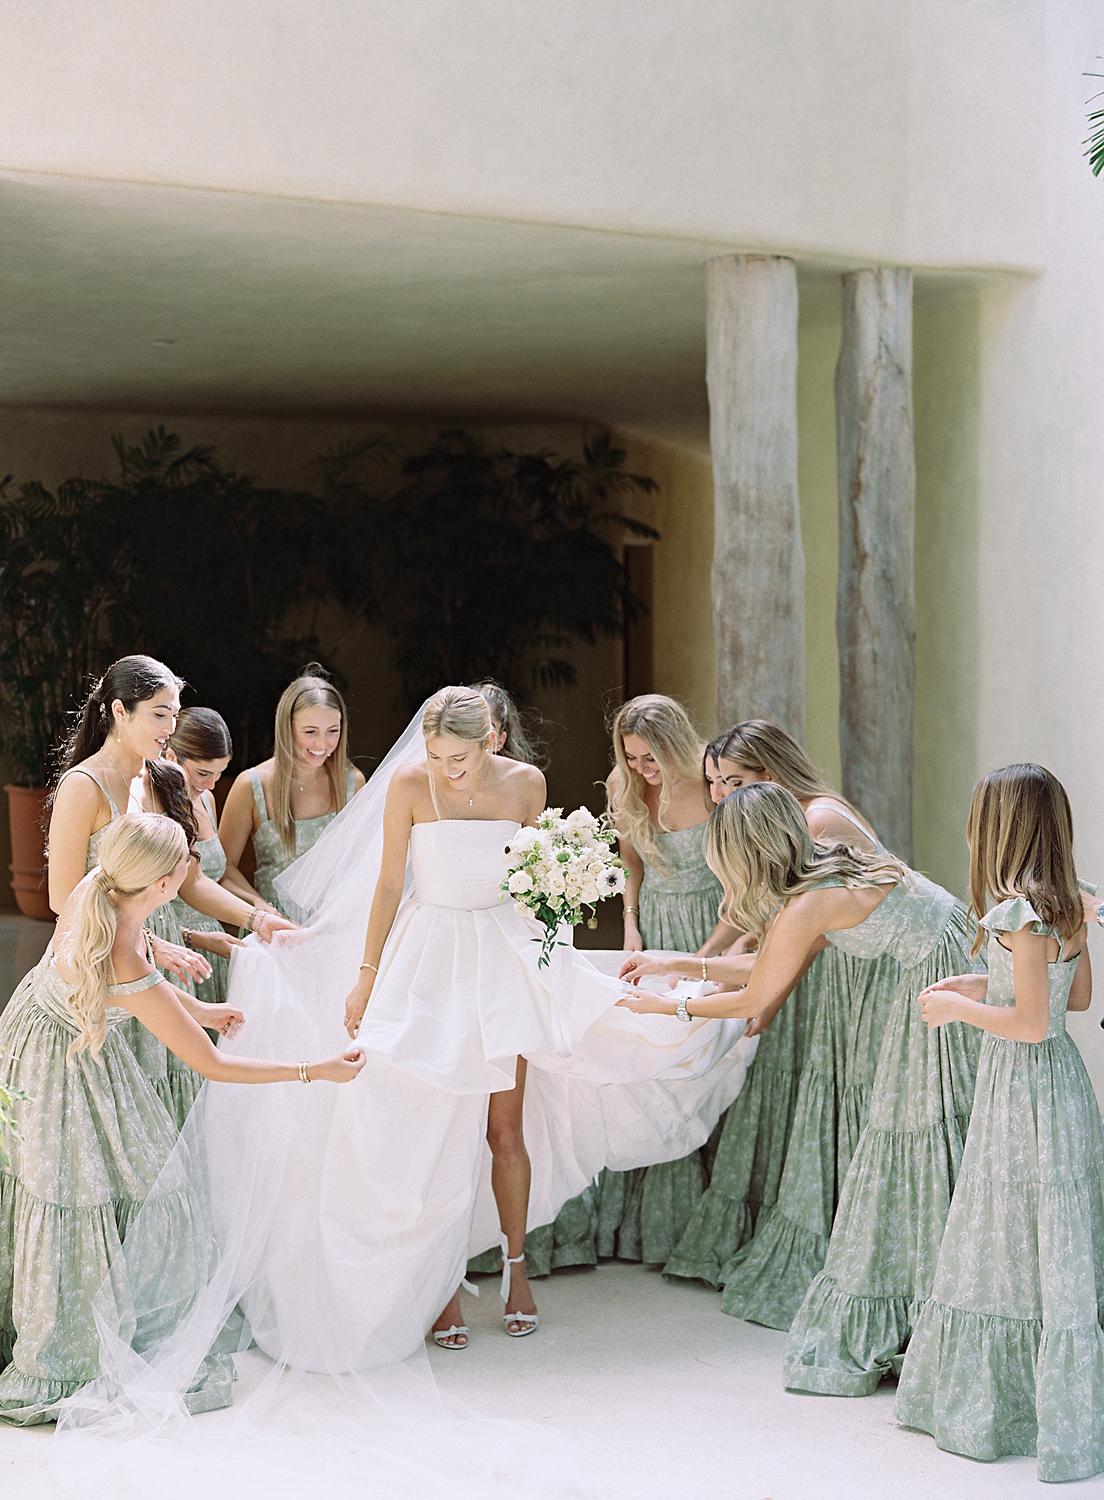 Bridesmaids all loving on and commenting about the brides dress just before their Altos de Chavón wedding.